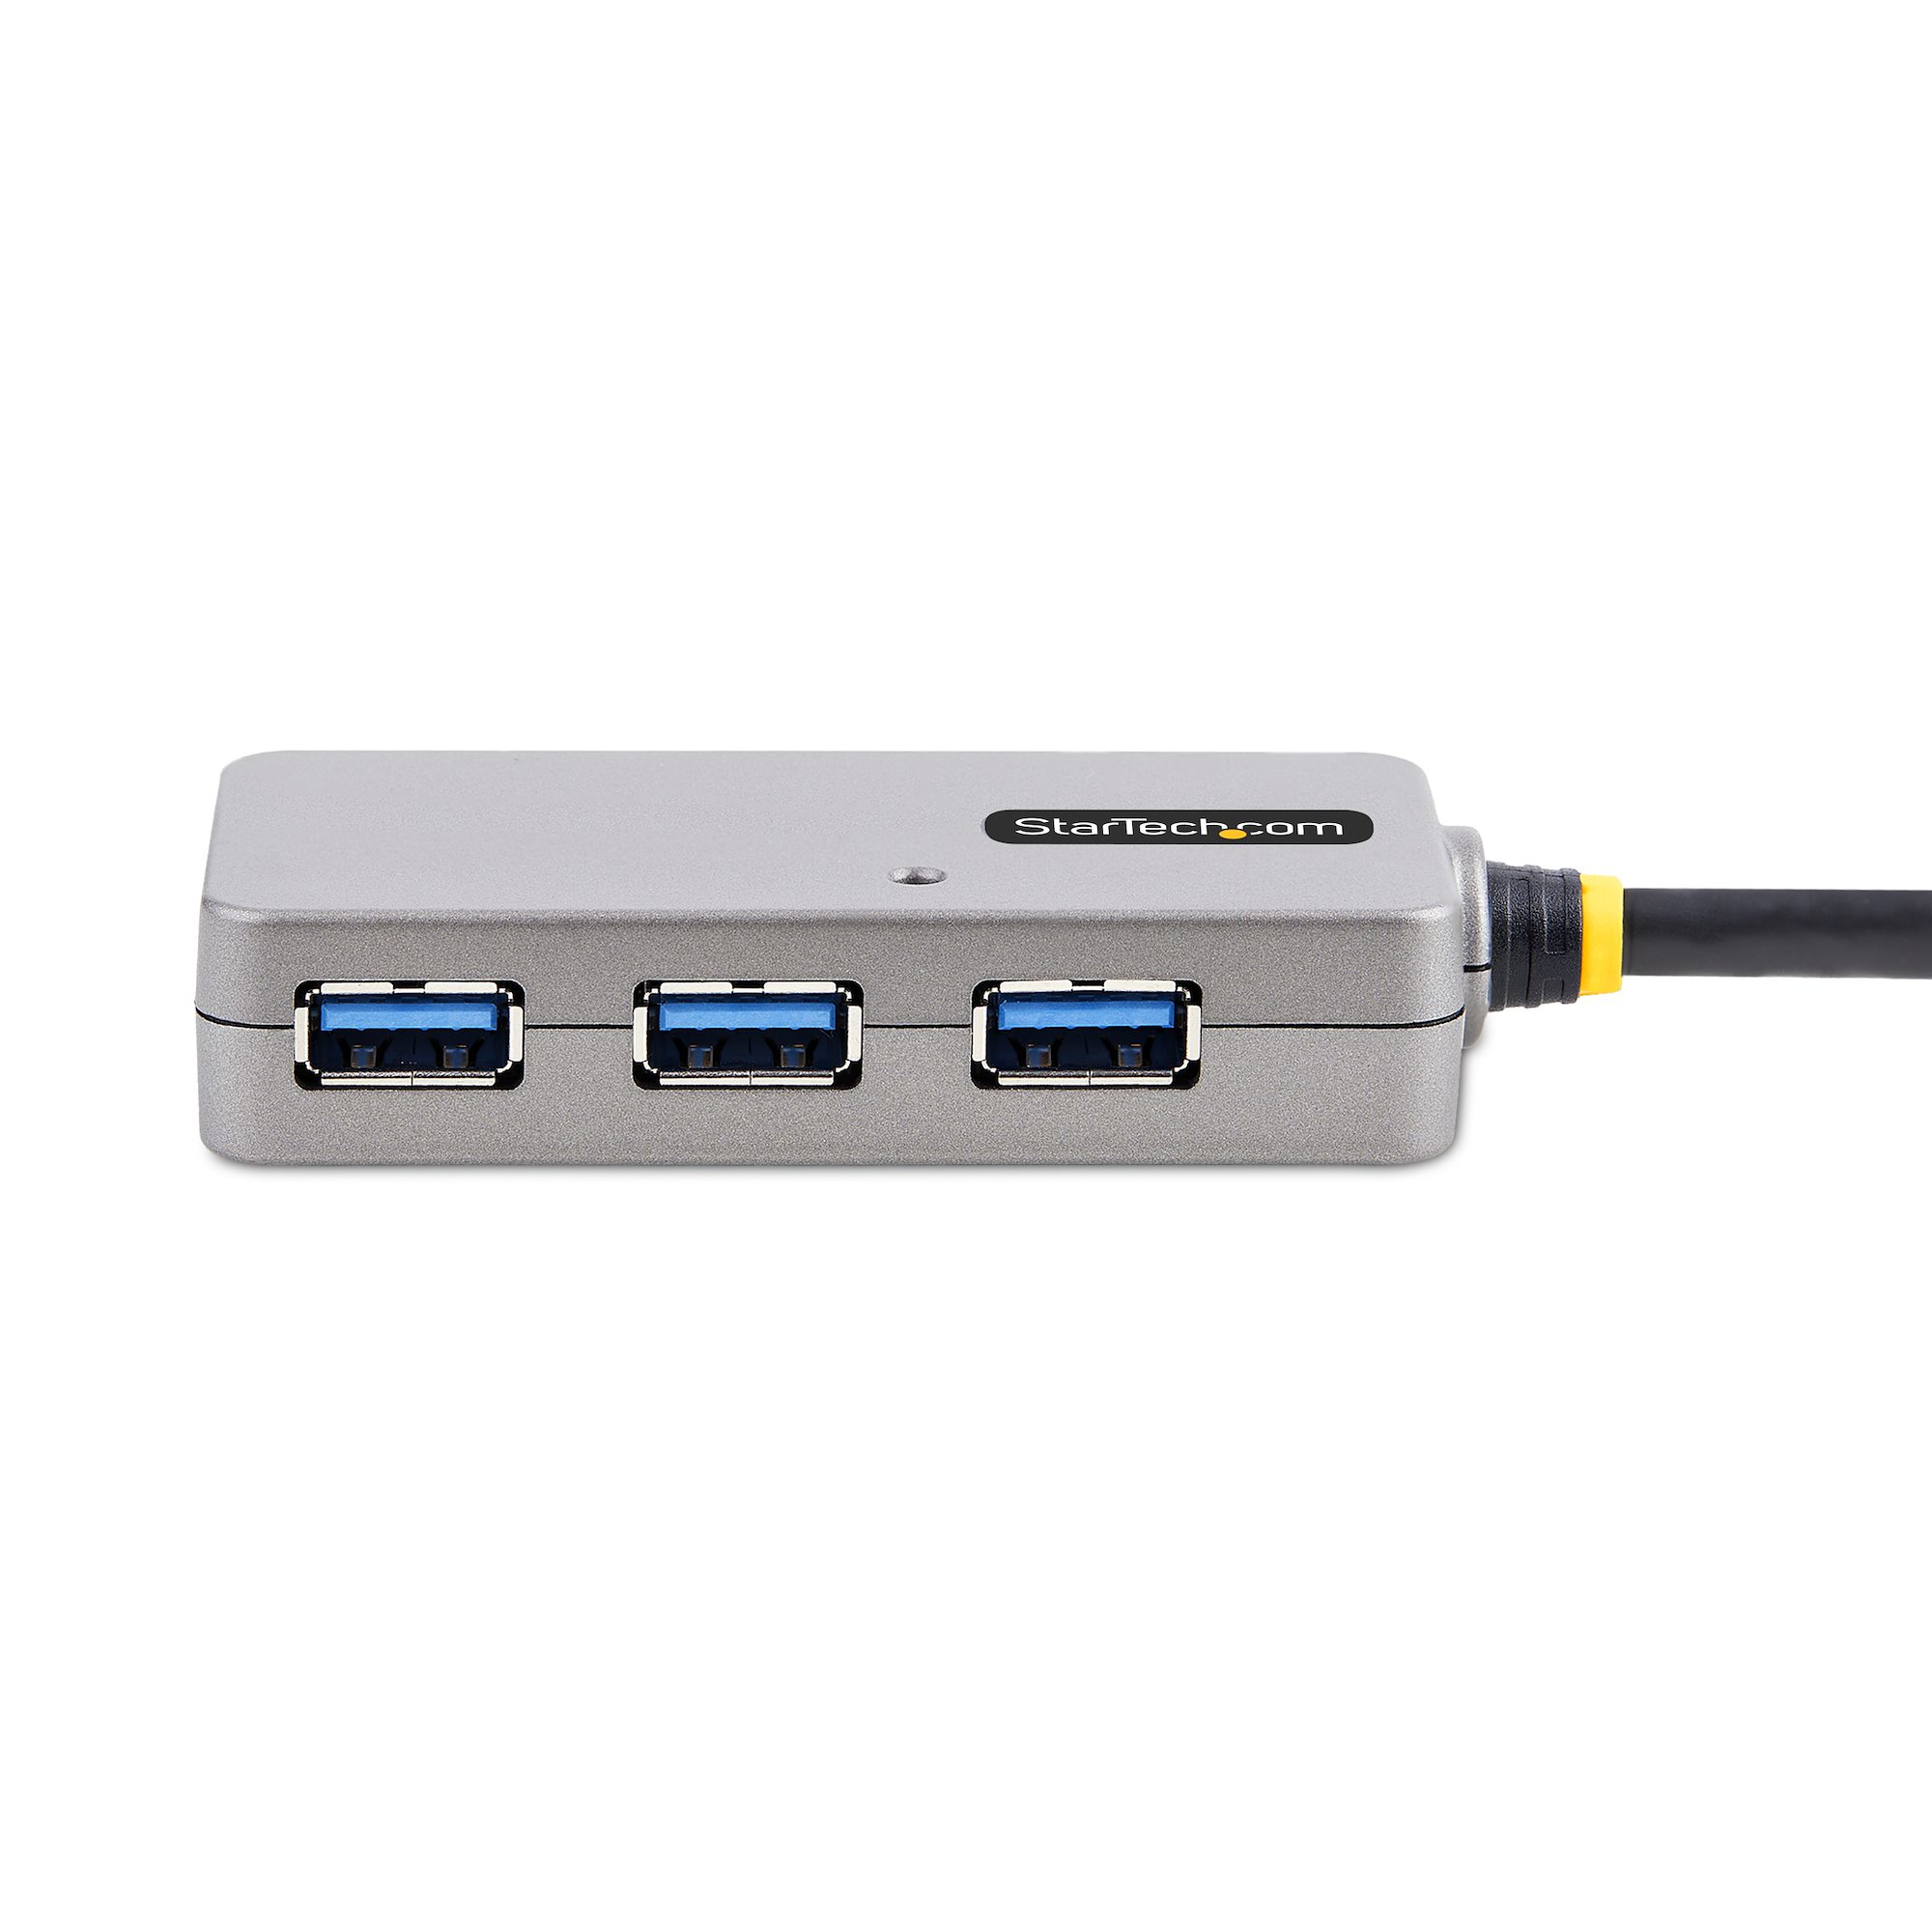 StarTech.com USB Extender Hub, 10m USB 3.0 Extension Cable with 4-Port USB-A Hub, Active/Bus Powered USB Repeater Cable, Optional 20W Power Supply Included, ESD Protection